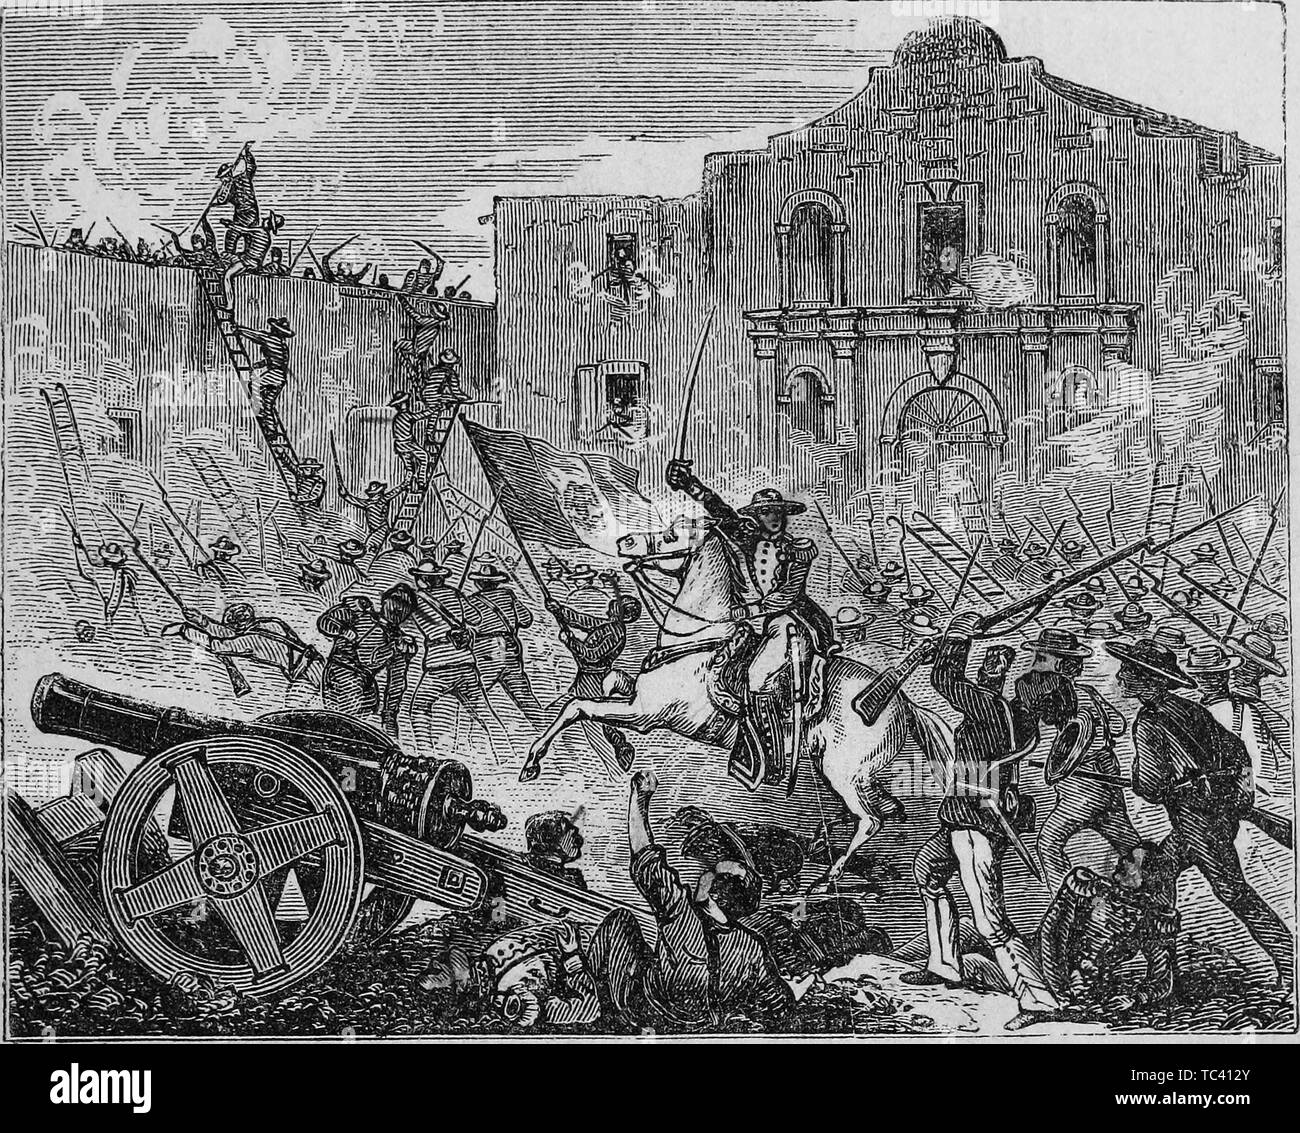 Engraving of the siege of the Alamo, the first thirteen days of the Battle of the Alamo, from the book 'Brief history of Texas from its earliest settlement to which is appended the constitution of the state' by De Witt Clinton Baker, 1873. Courtesy Internet Archive. () Stock Photo